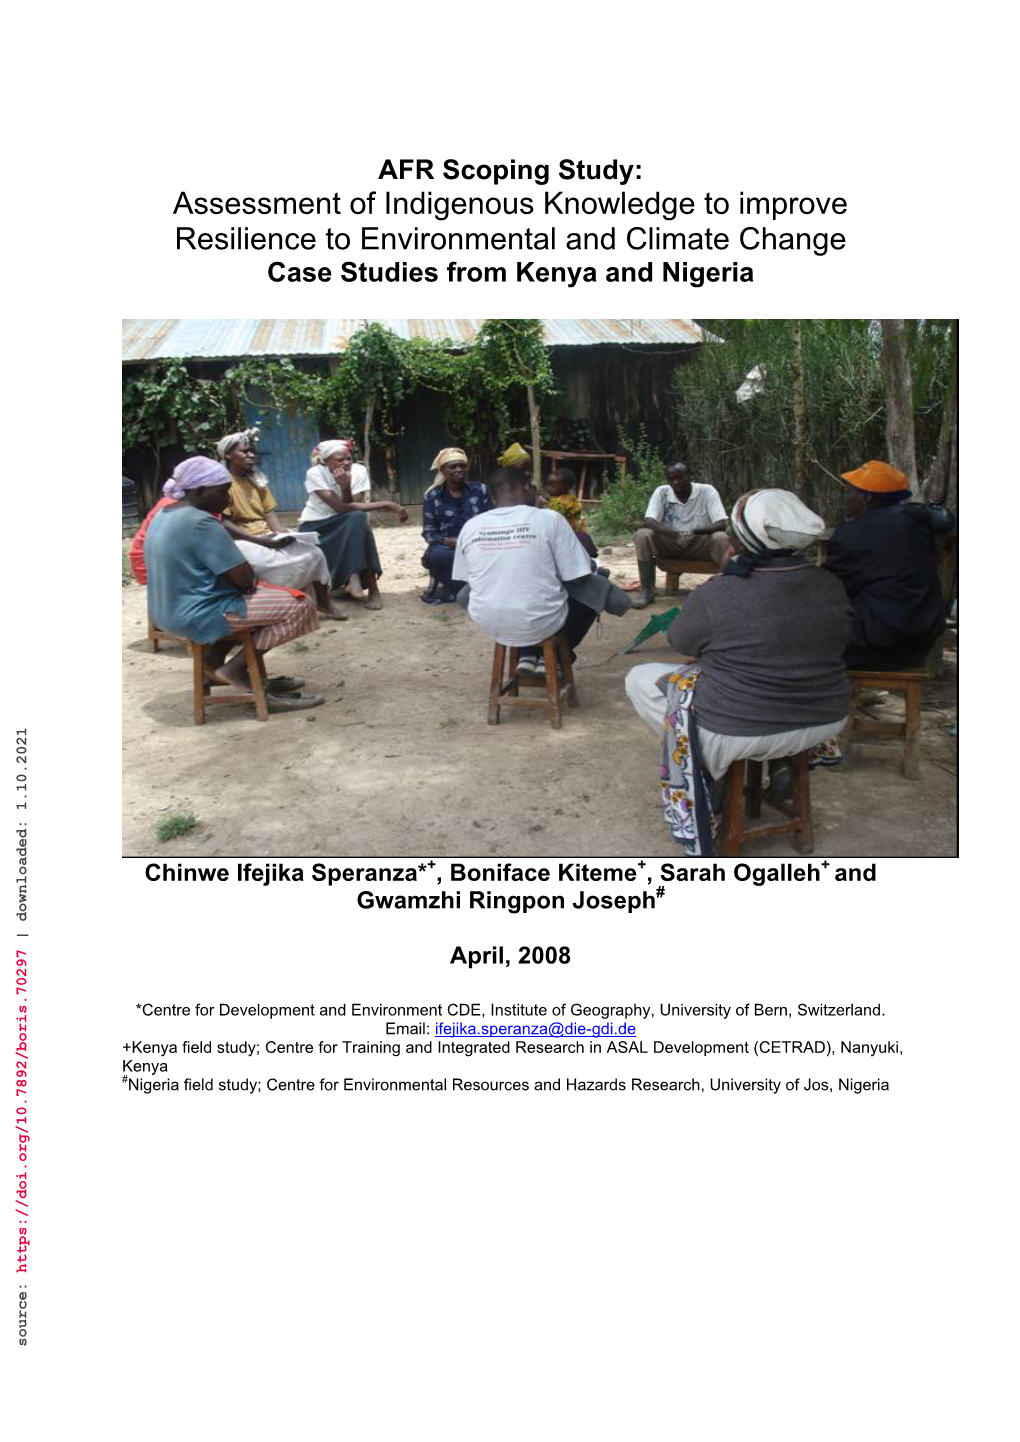 Assessment of Indigenous Knowledge to Improve Resilience To